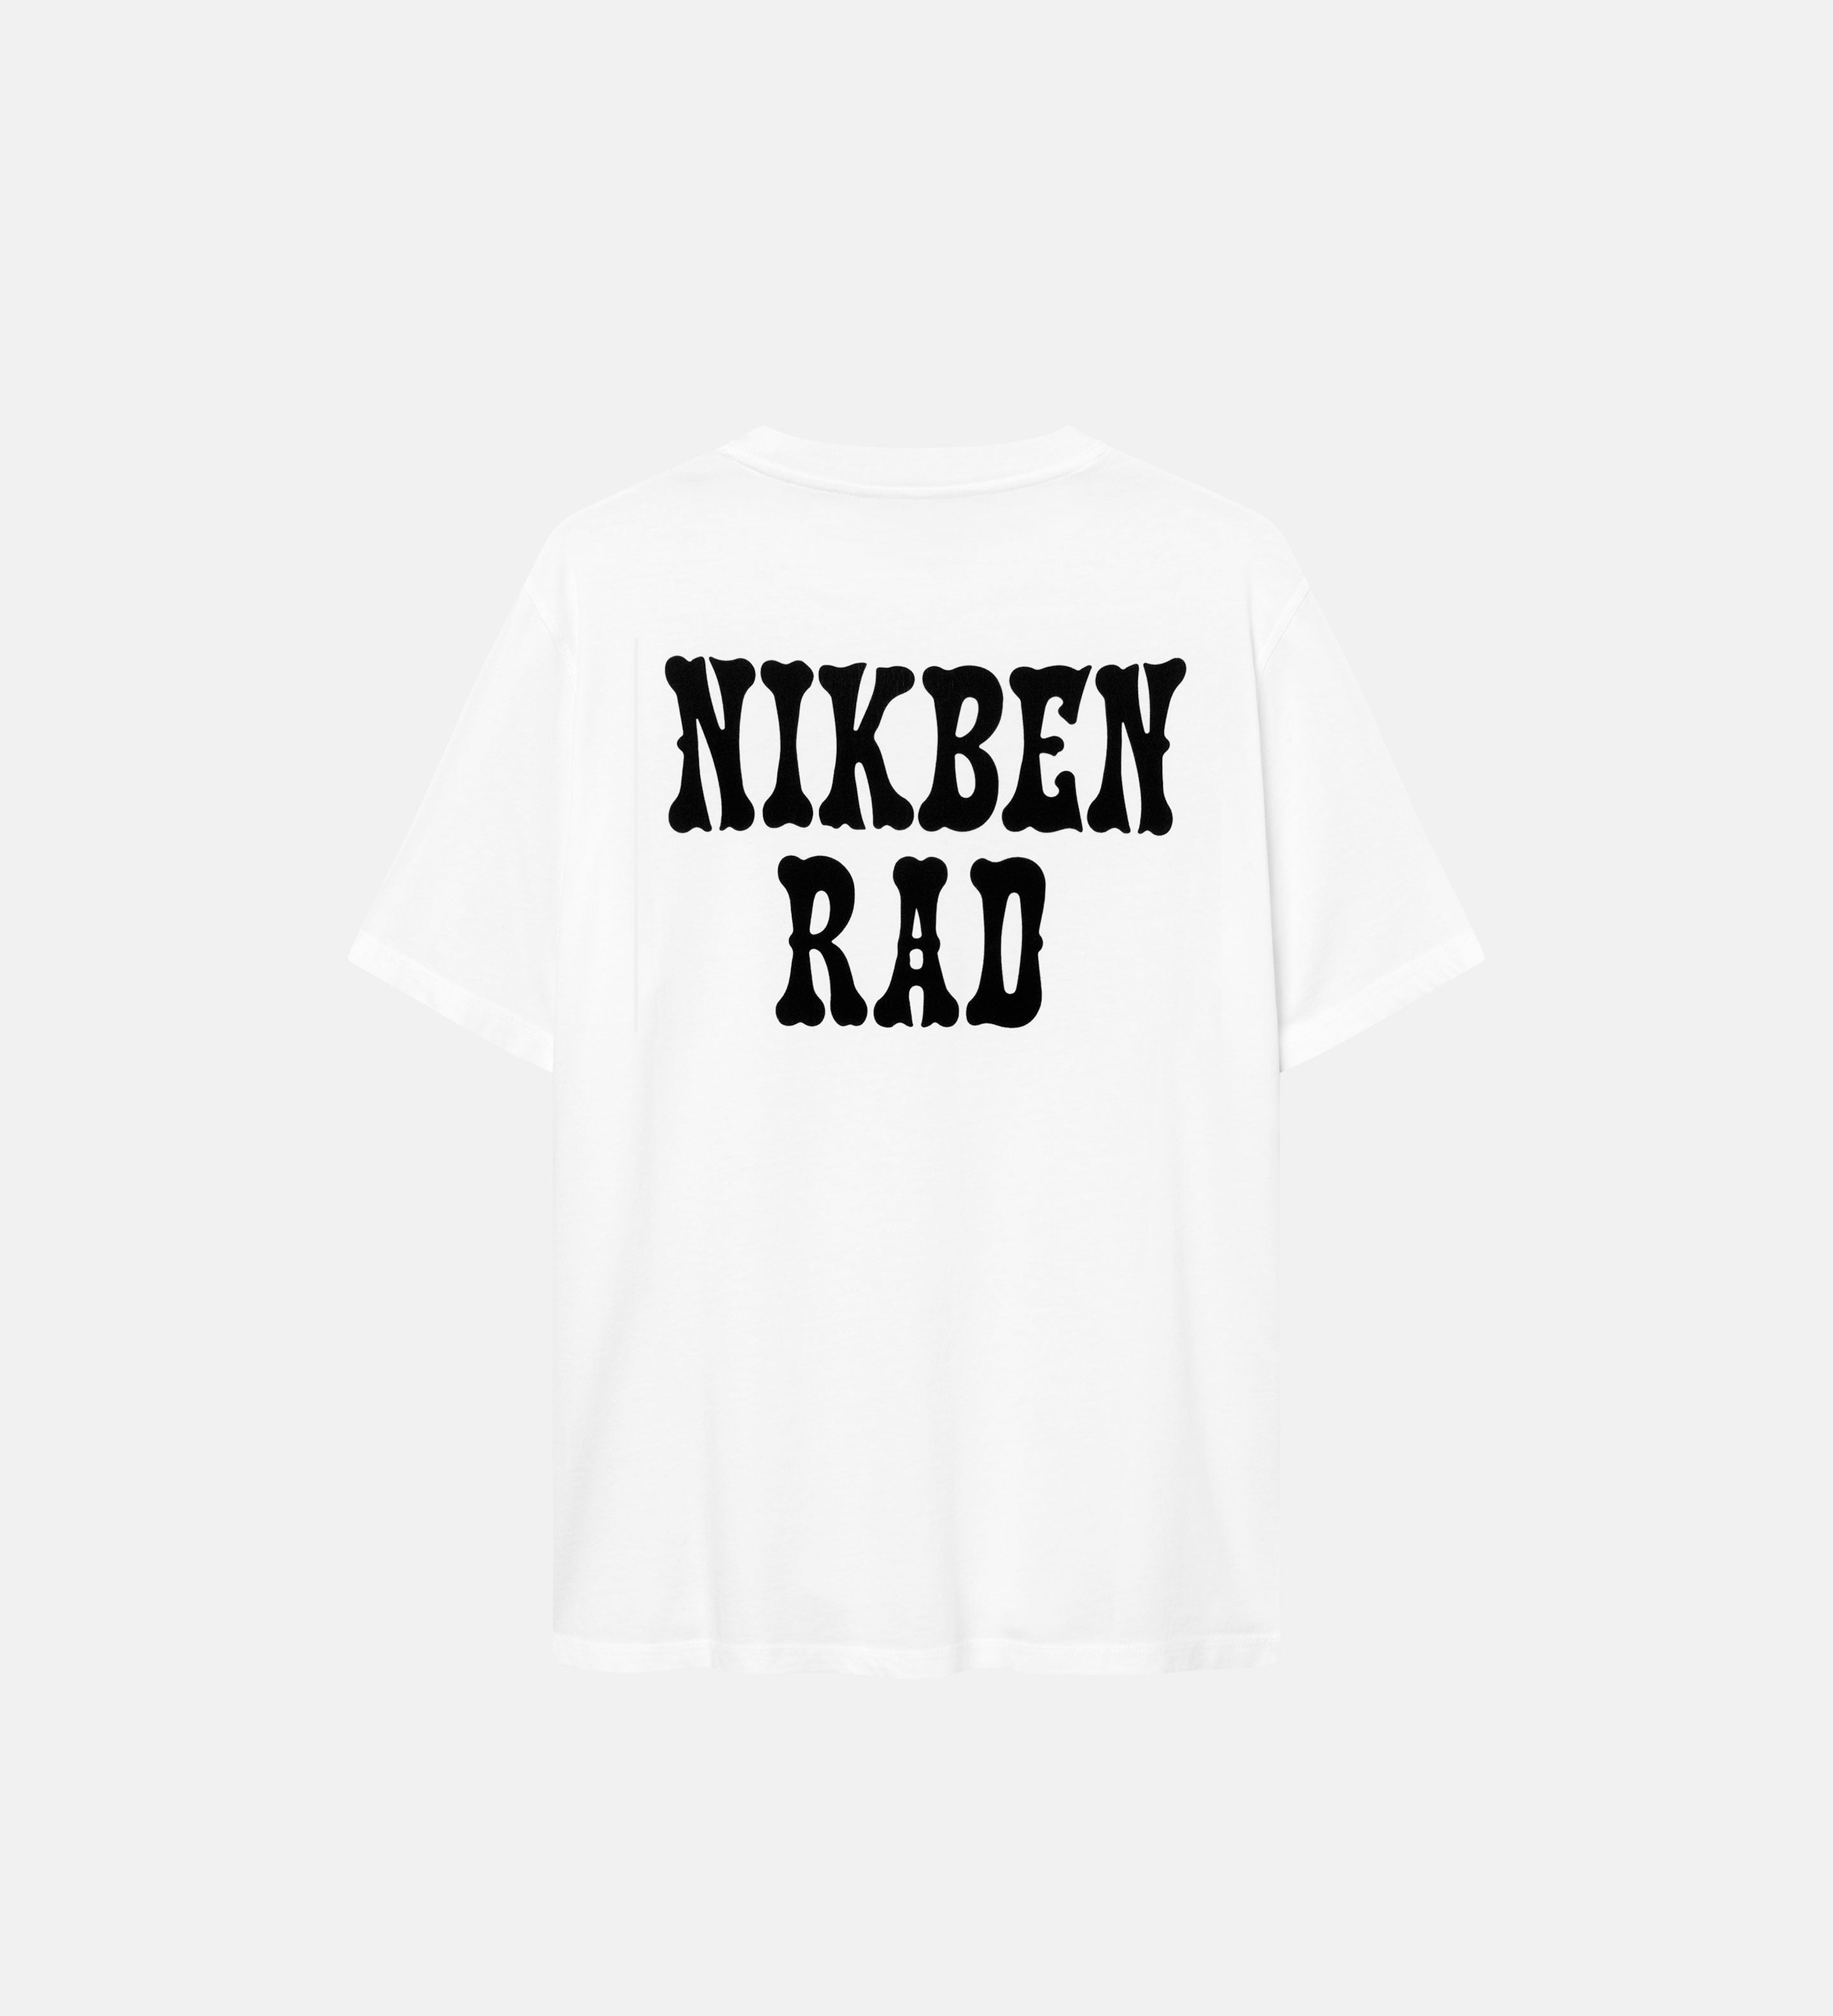 A white t-shirt with a large black "Nikben Rad" on its back